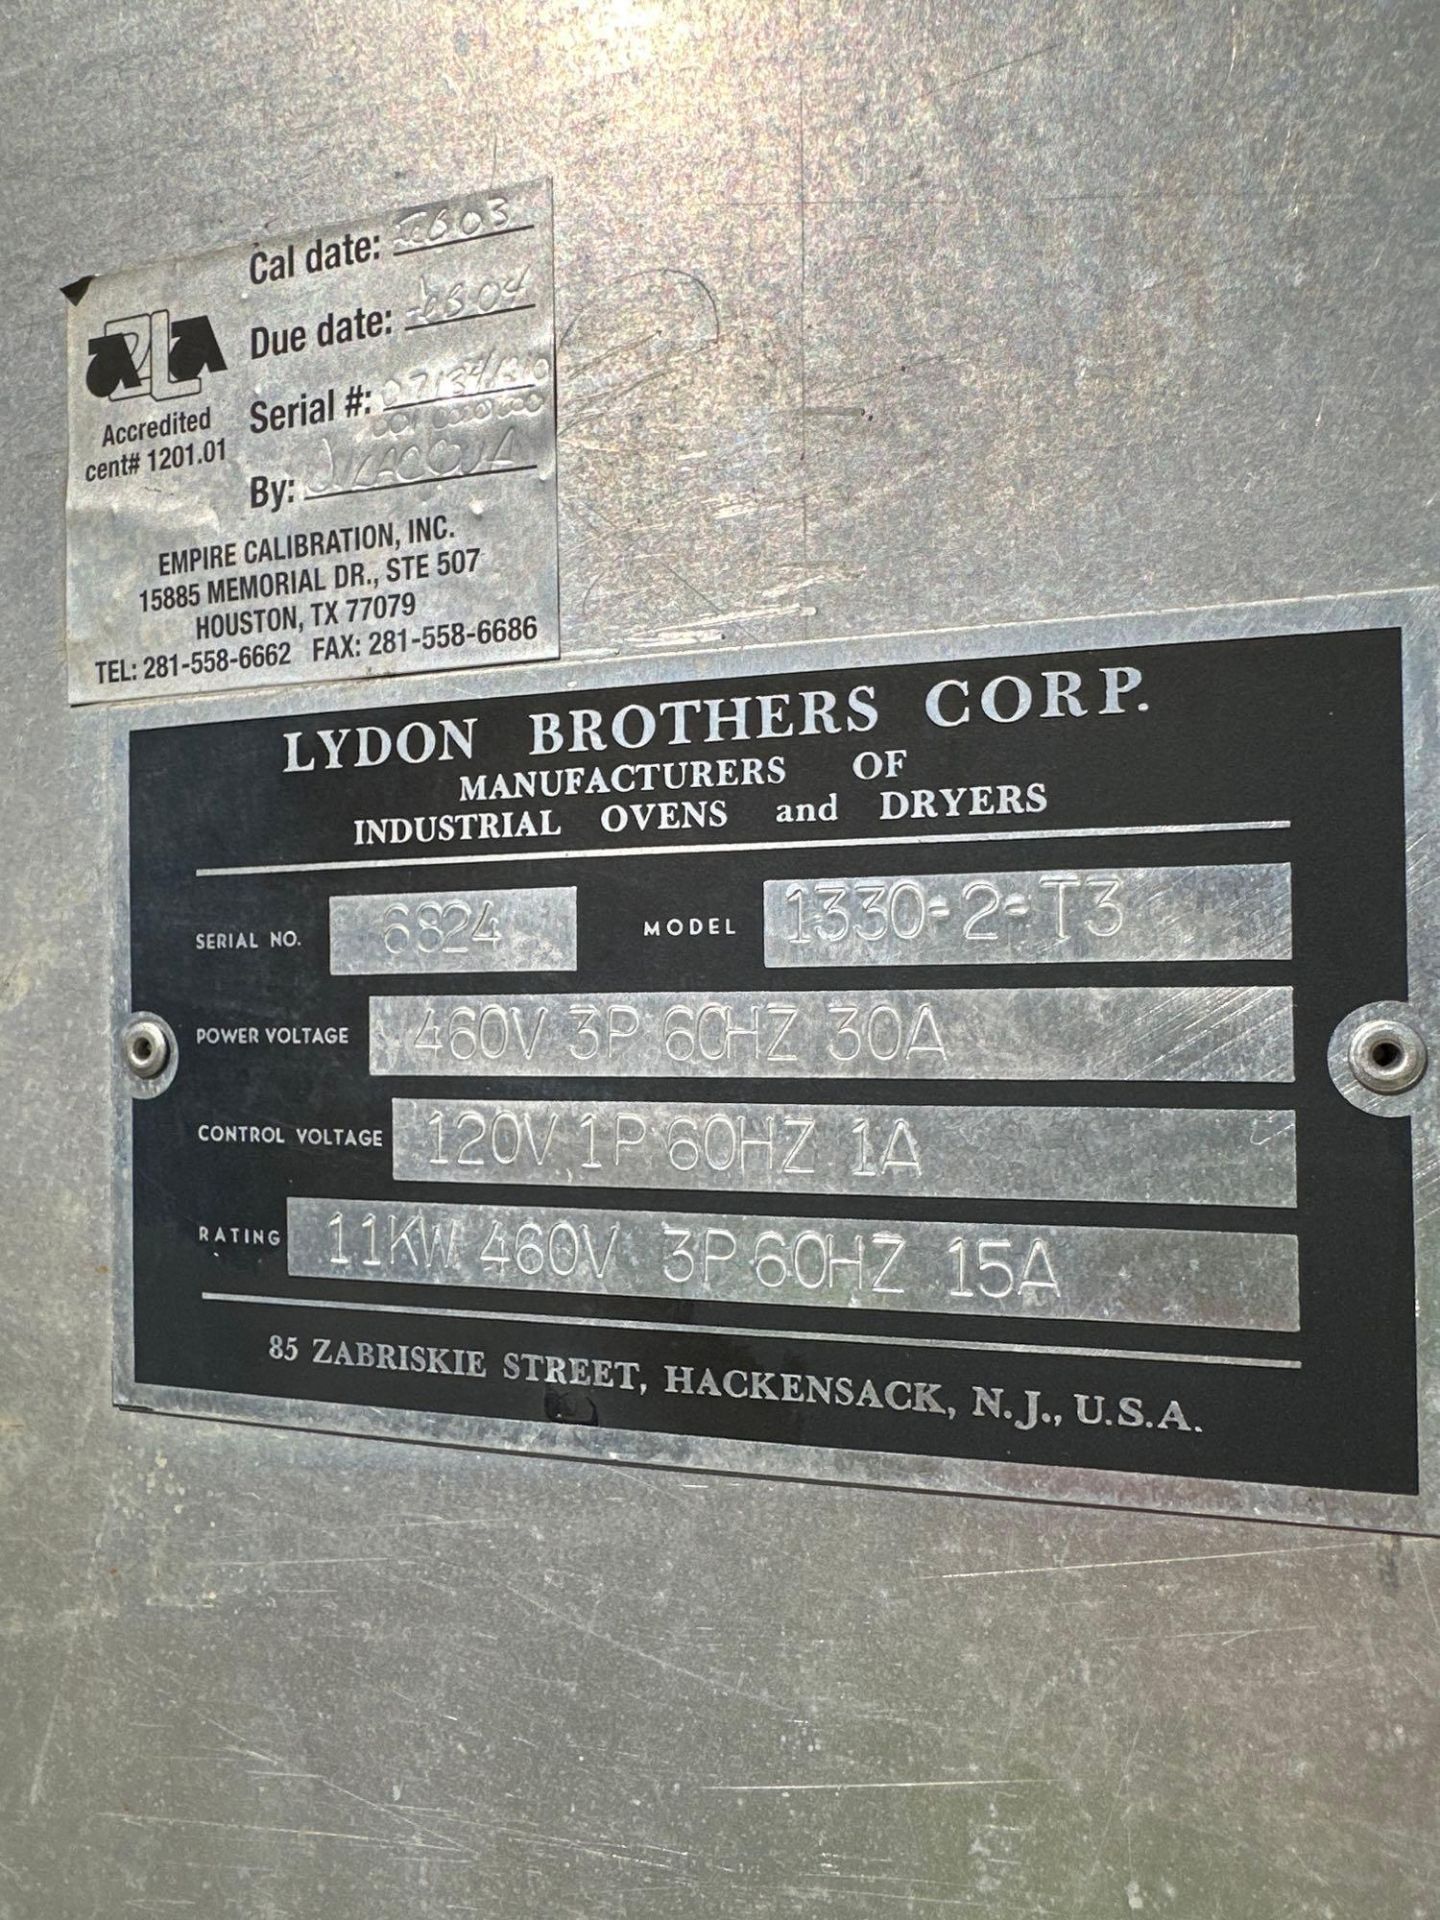 LYDON BROTHERS 1330-2-T3 RESIN DRYER - Image 2 of 7